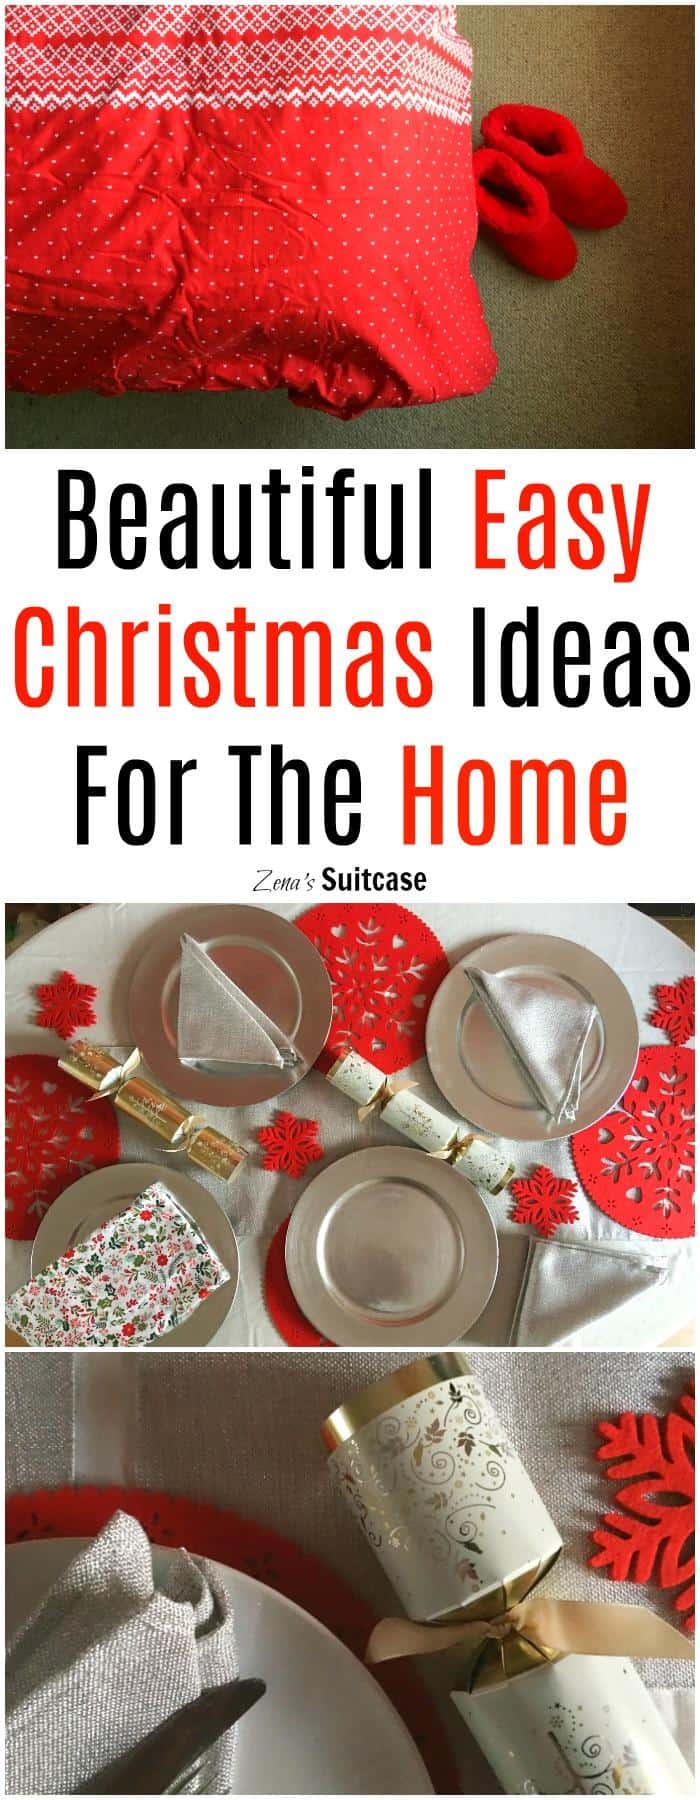 Beautiful Easy Christmas Ideas For The Home - add some gorgeous festive touches to your home with these simple ideas including Nordic inspired red duvet and red and silver themed table settings for Christmas dinner 